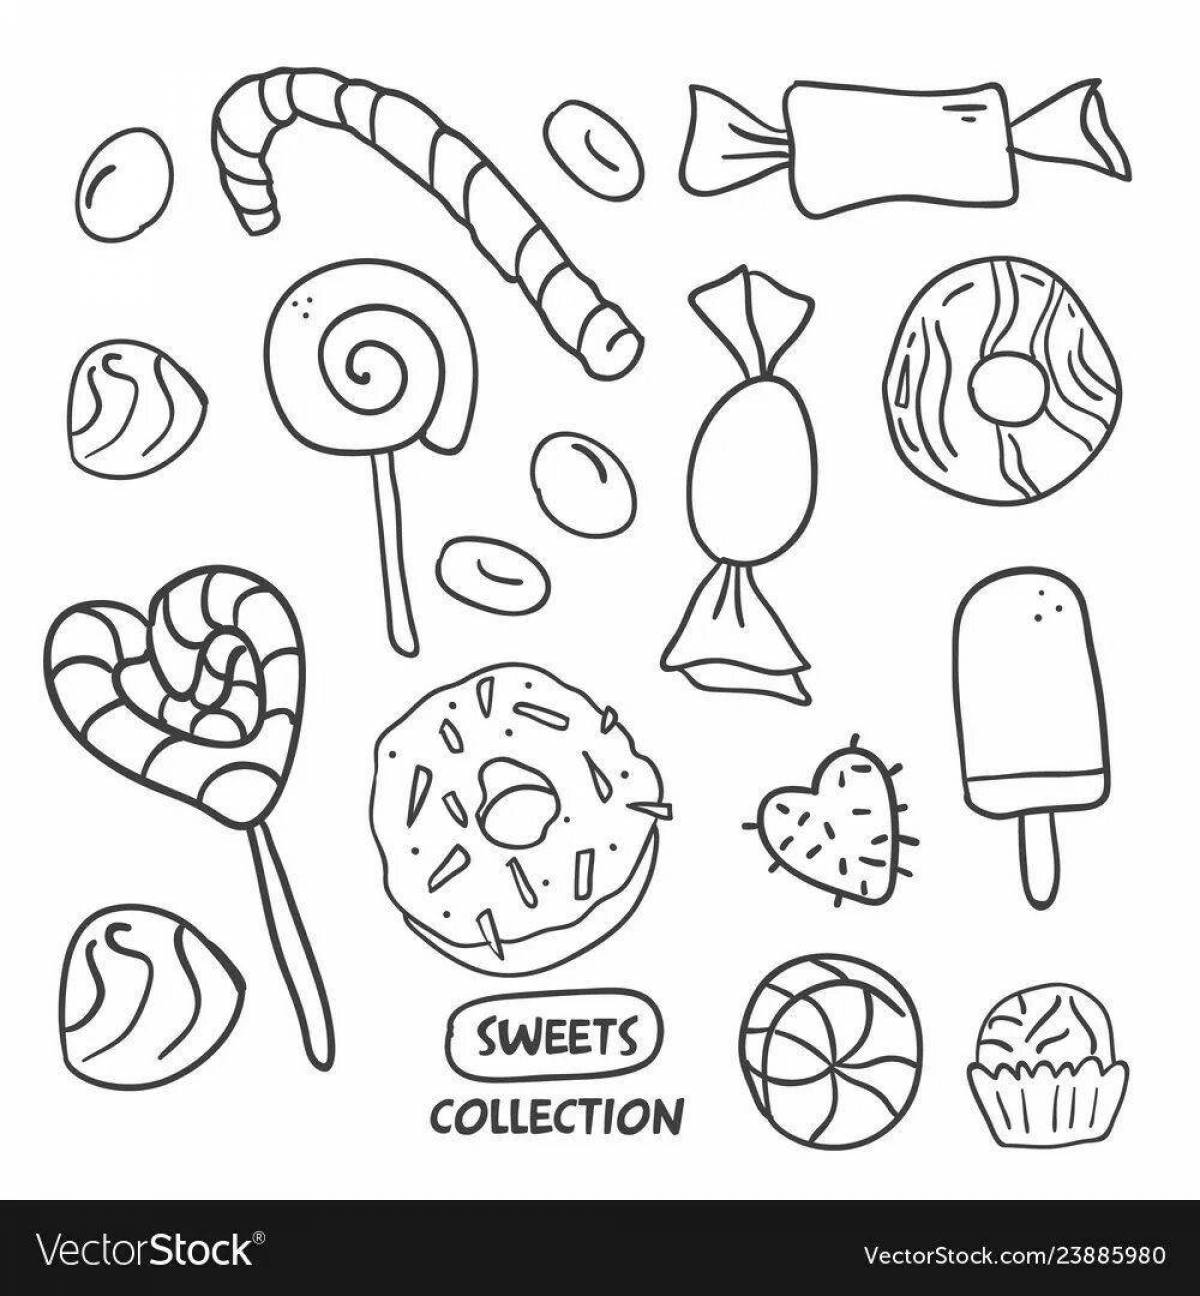 Gorgeous marshmallow coloring page